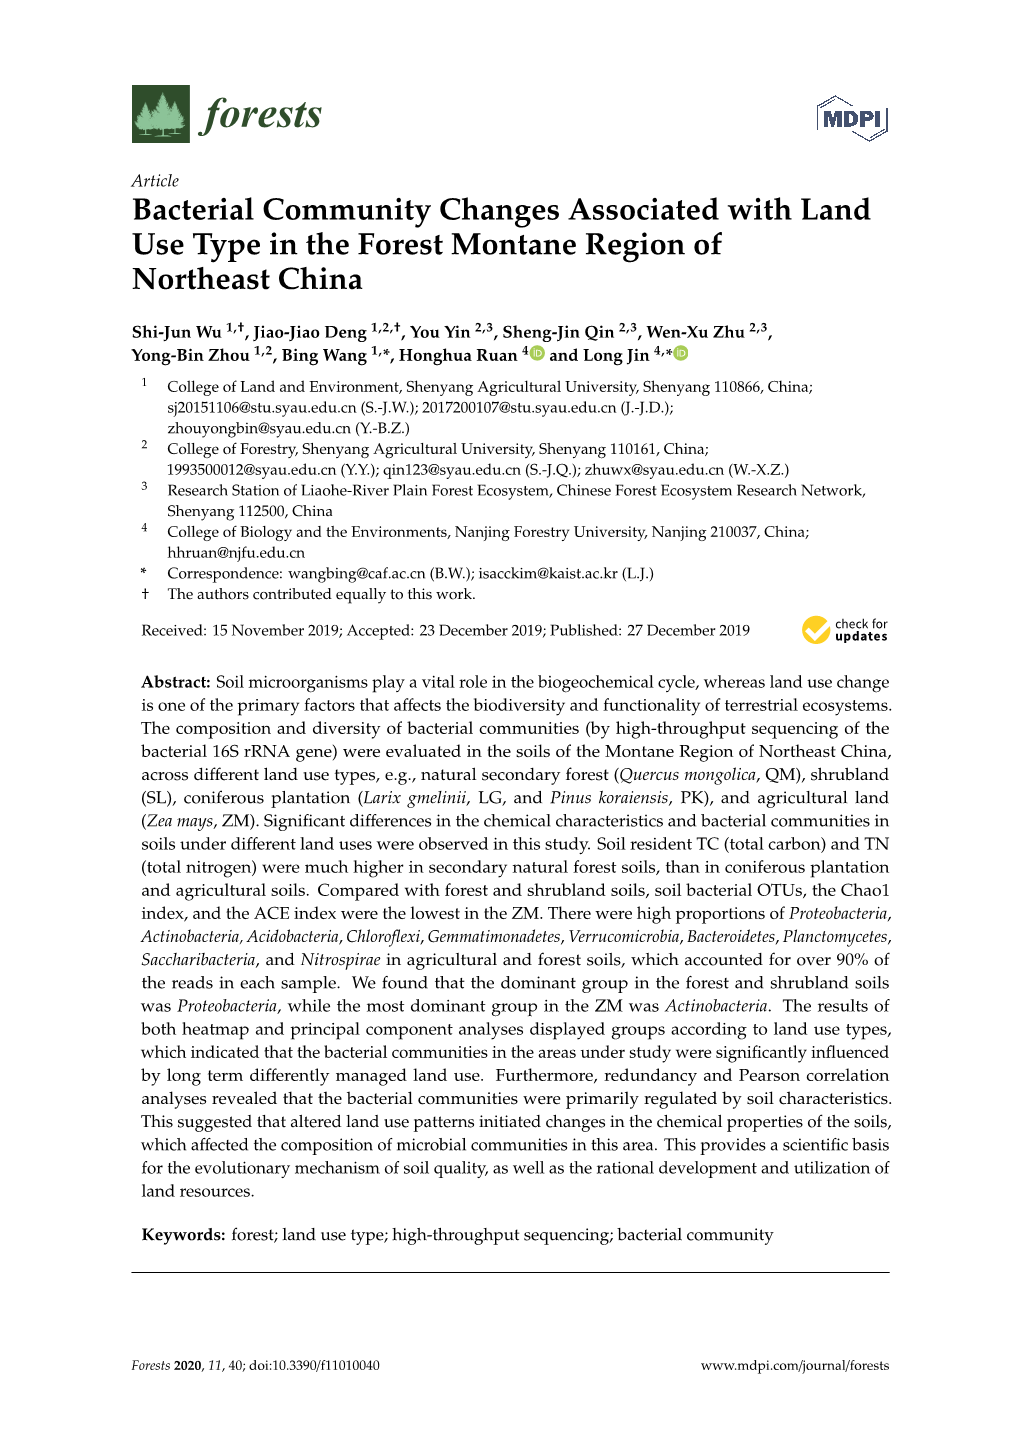 Bacterial Community Changes Associated with Land Use Type in the Forest Montane Region of Northeast China